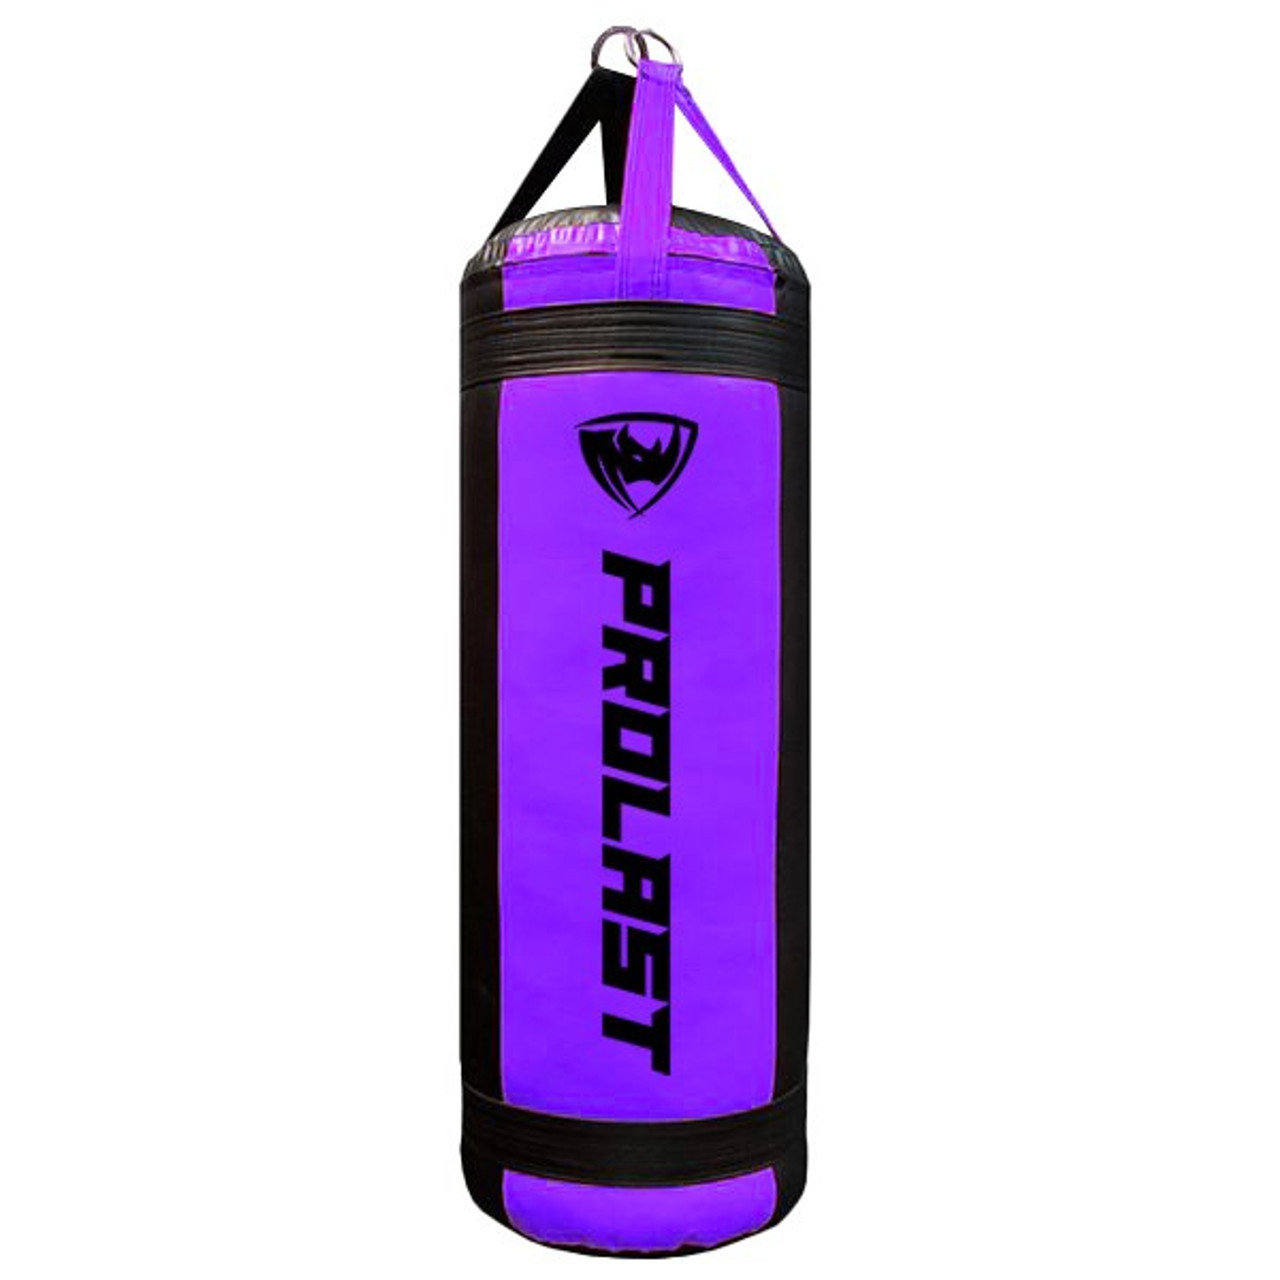 Prolast 4FT XL 135LB Mayweather Style Punching Bag Black // Purple UNFILLED - Made in USA